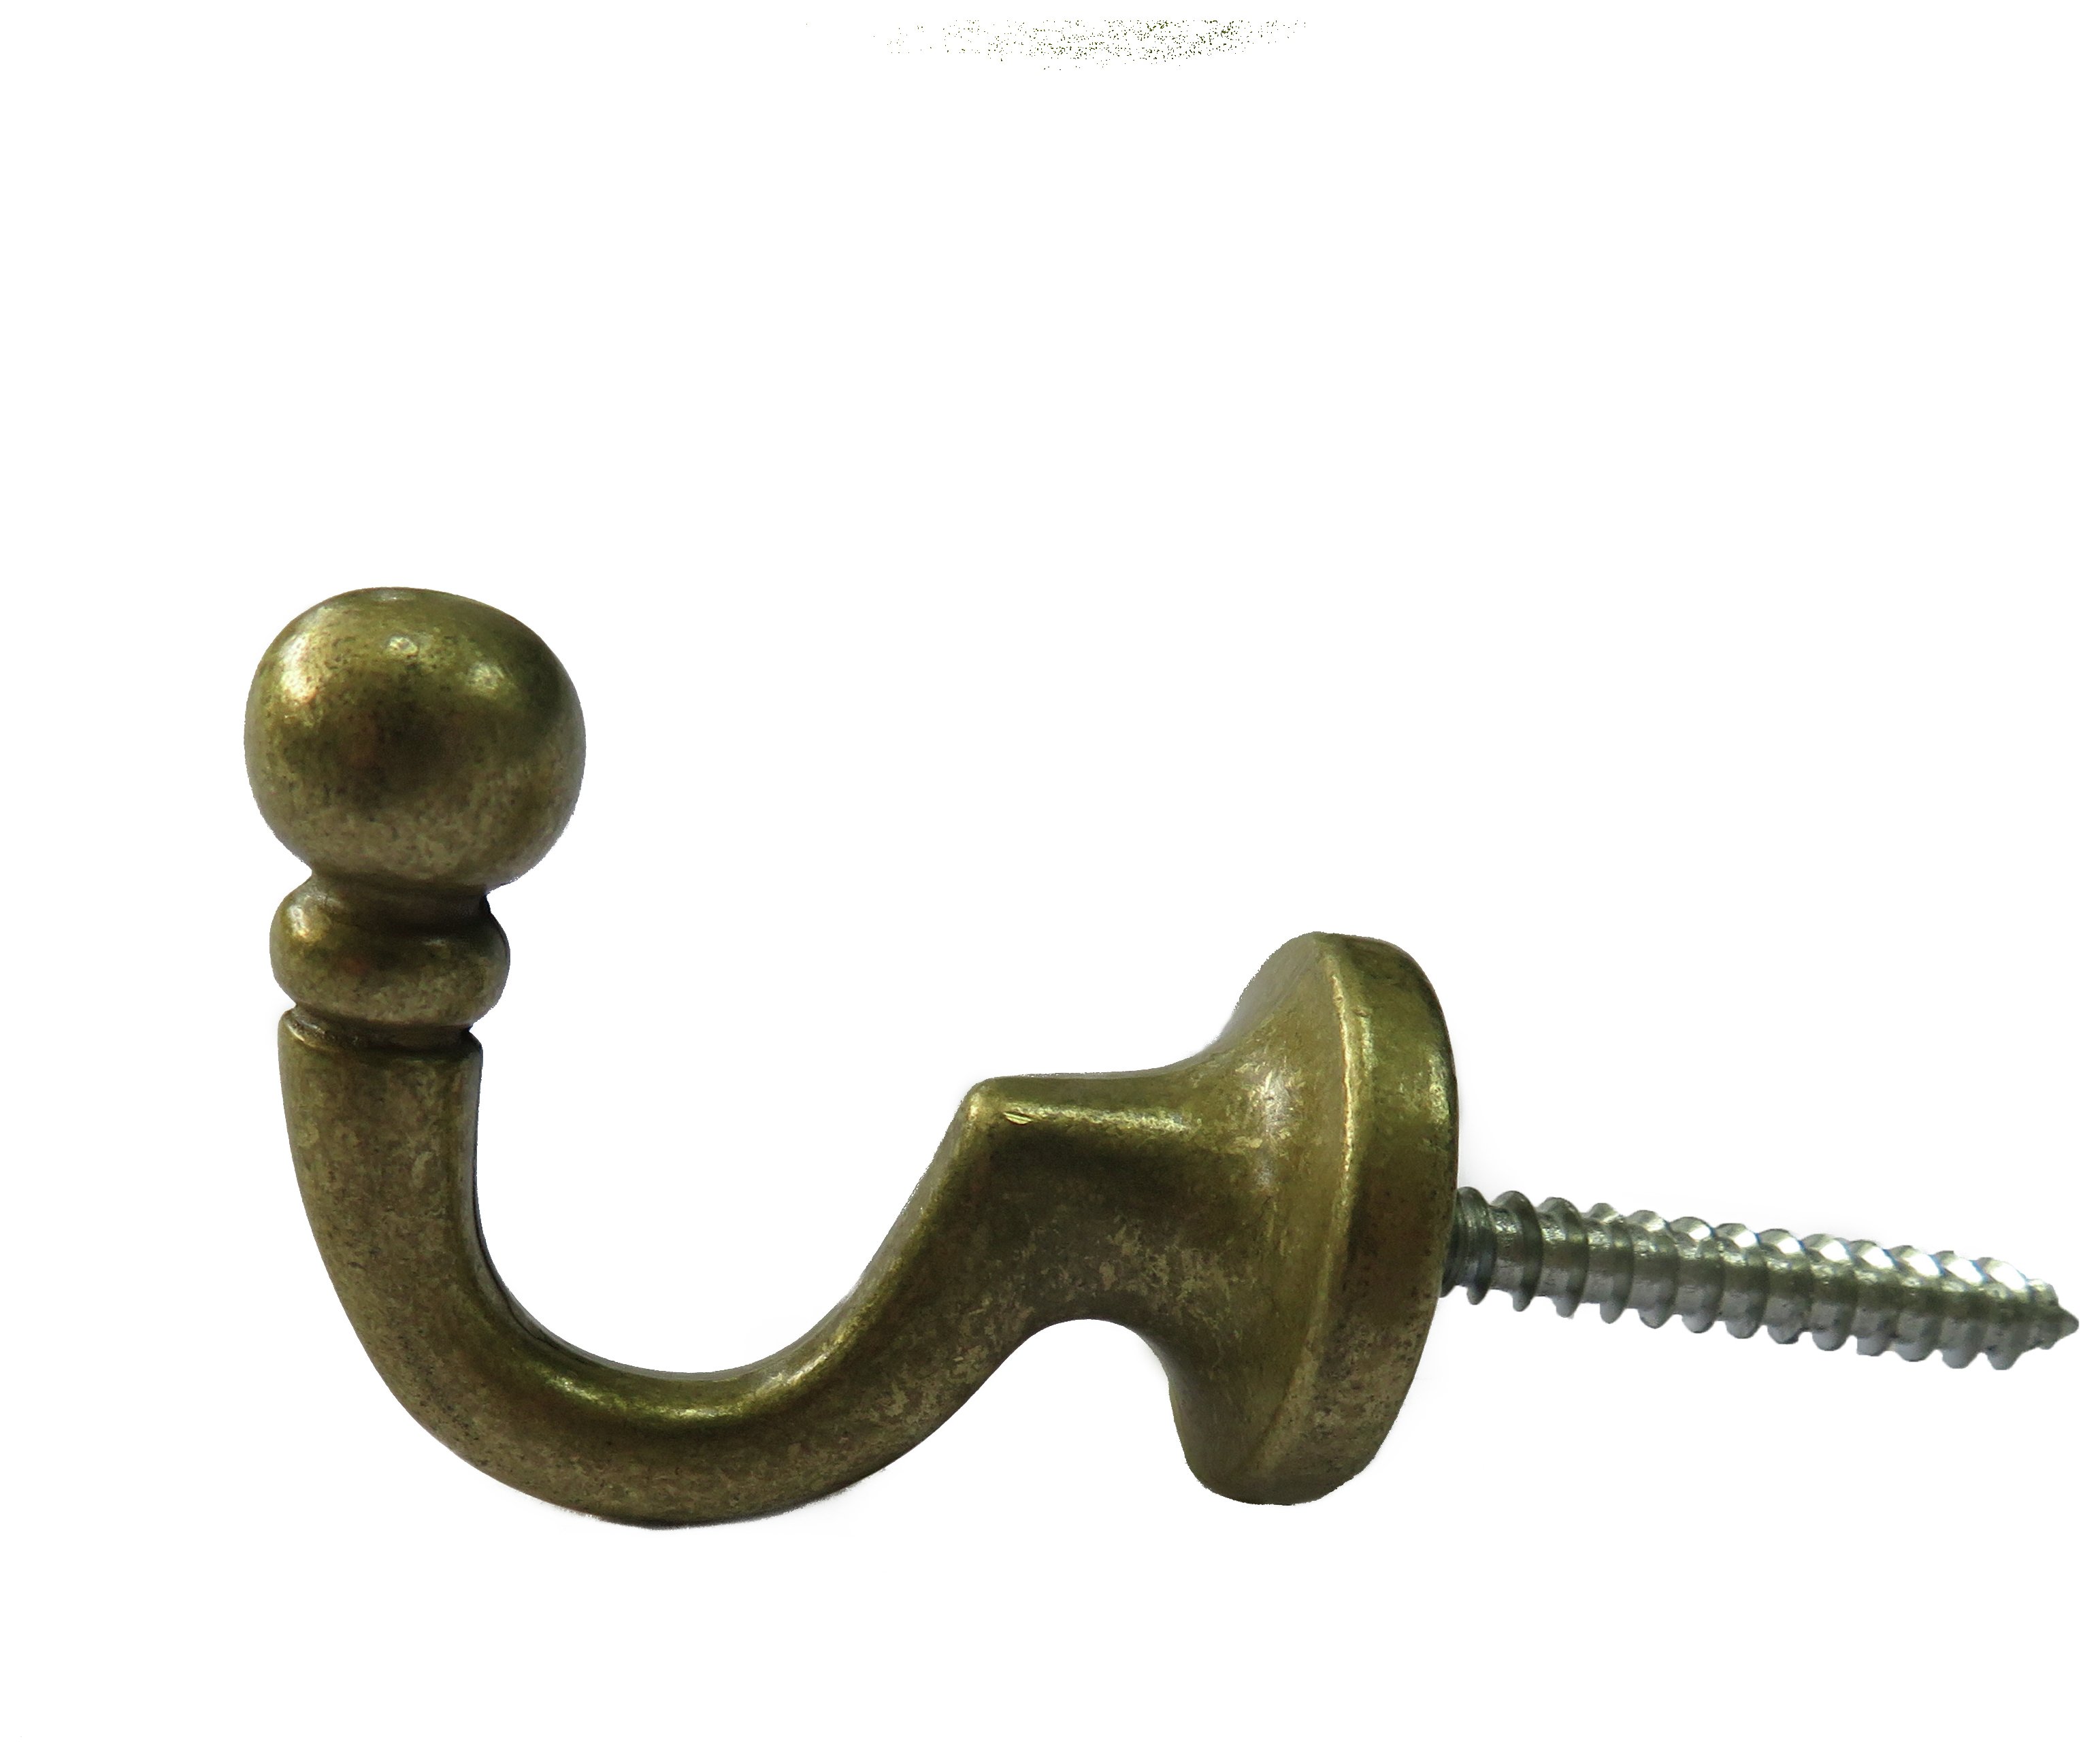 HOME Set of 6 Ball End Tie Back Hooks - Antique Brass